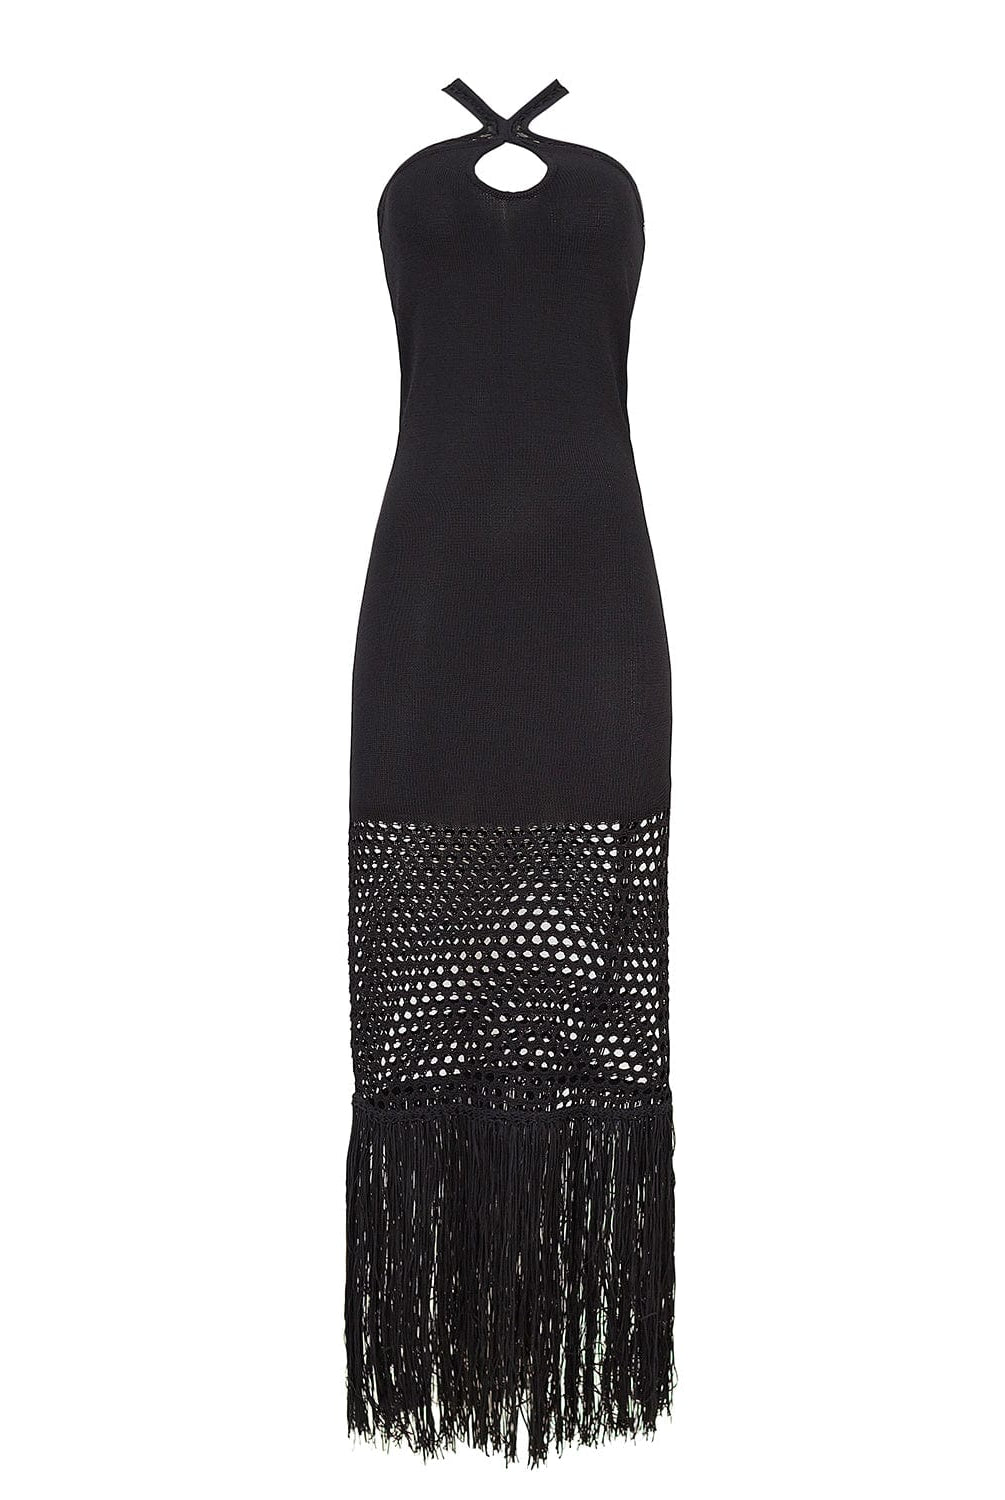 A black full length coverup dress with stitching details and fringe. Featured against a white wall background.